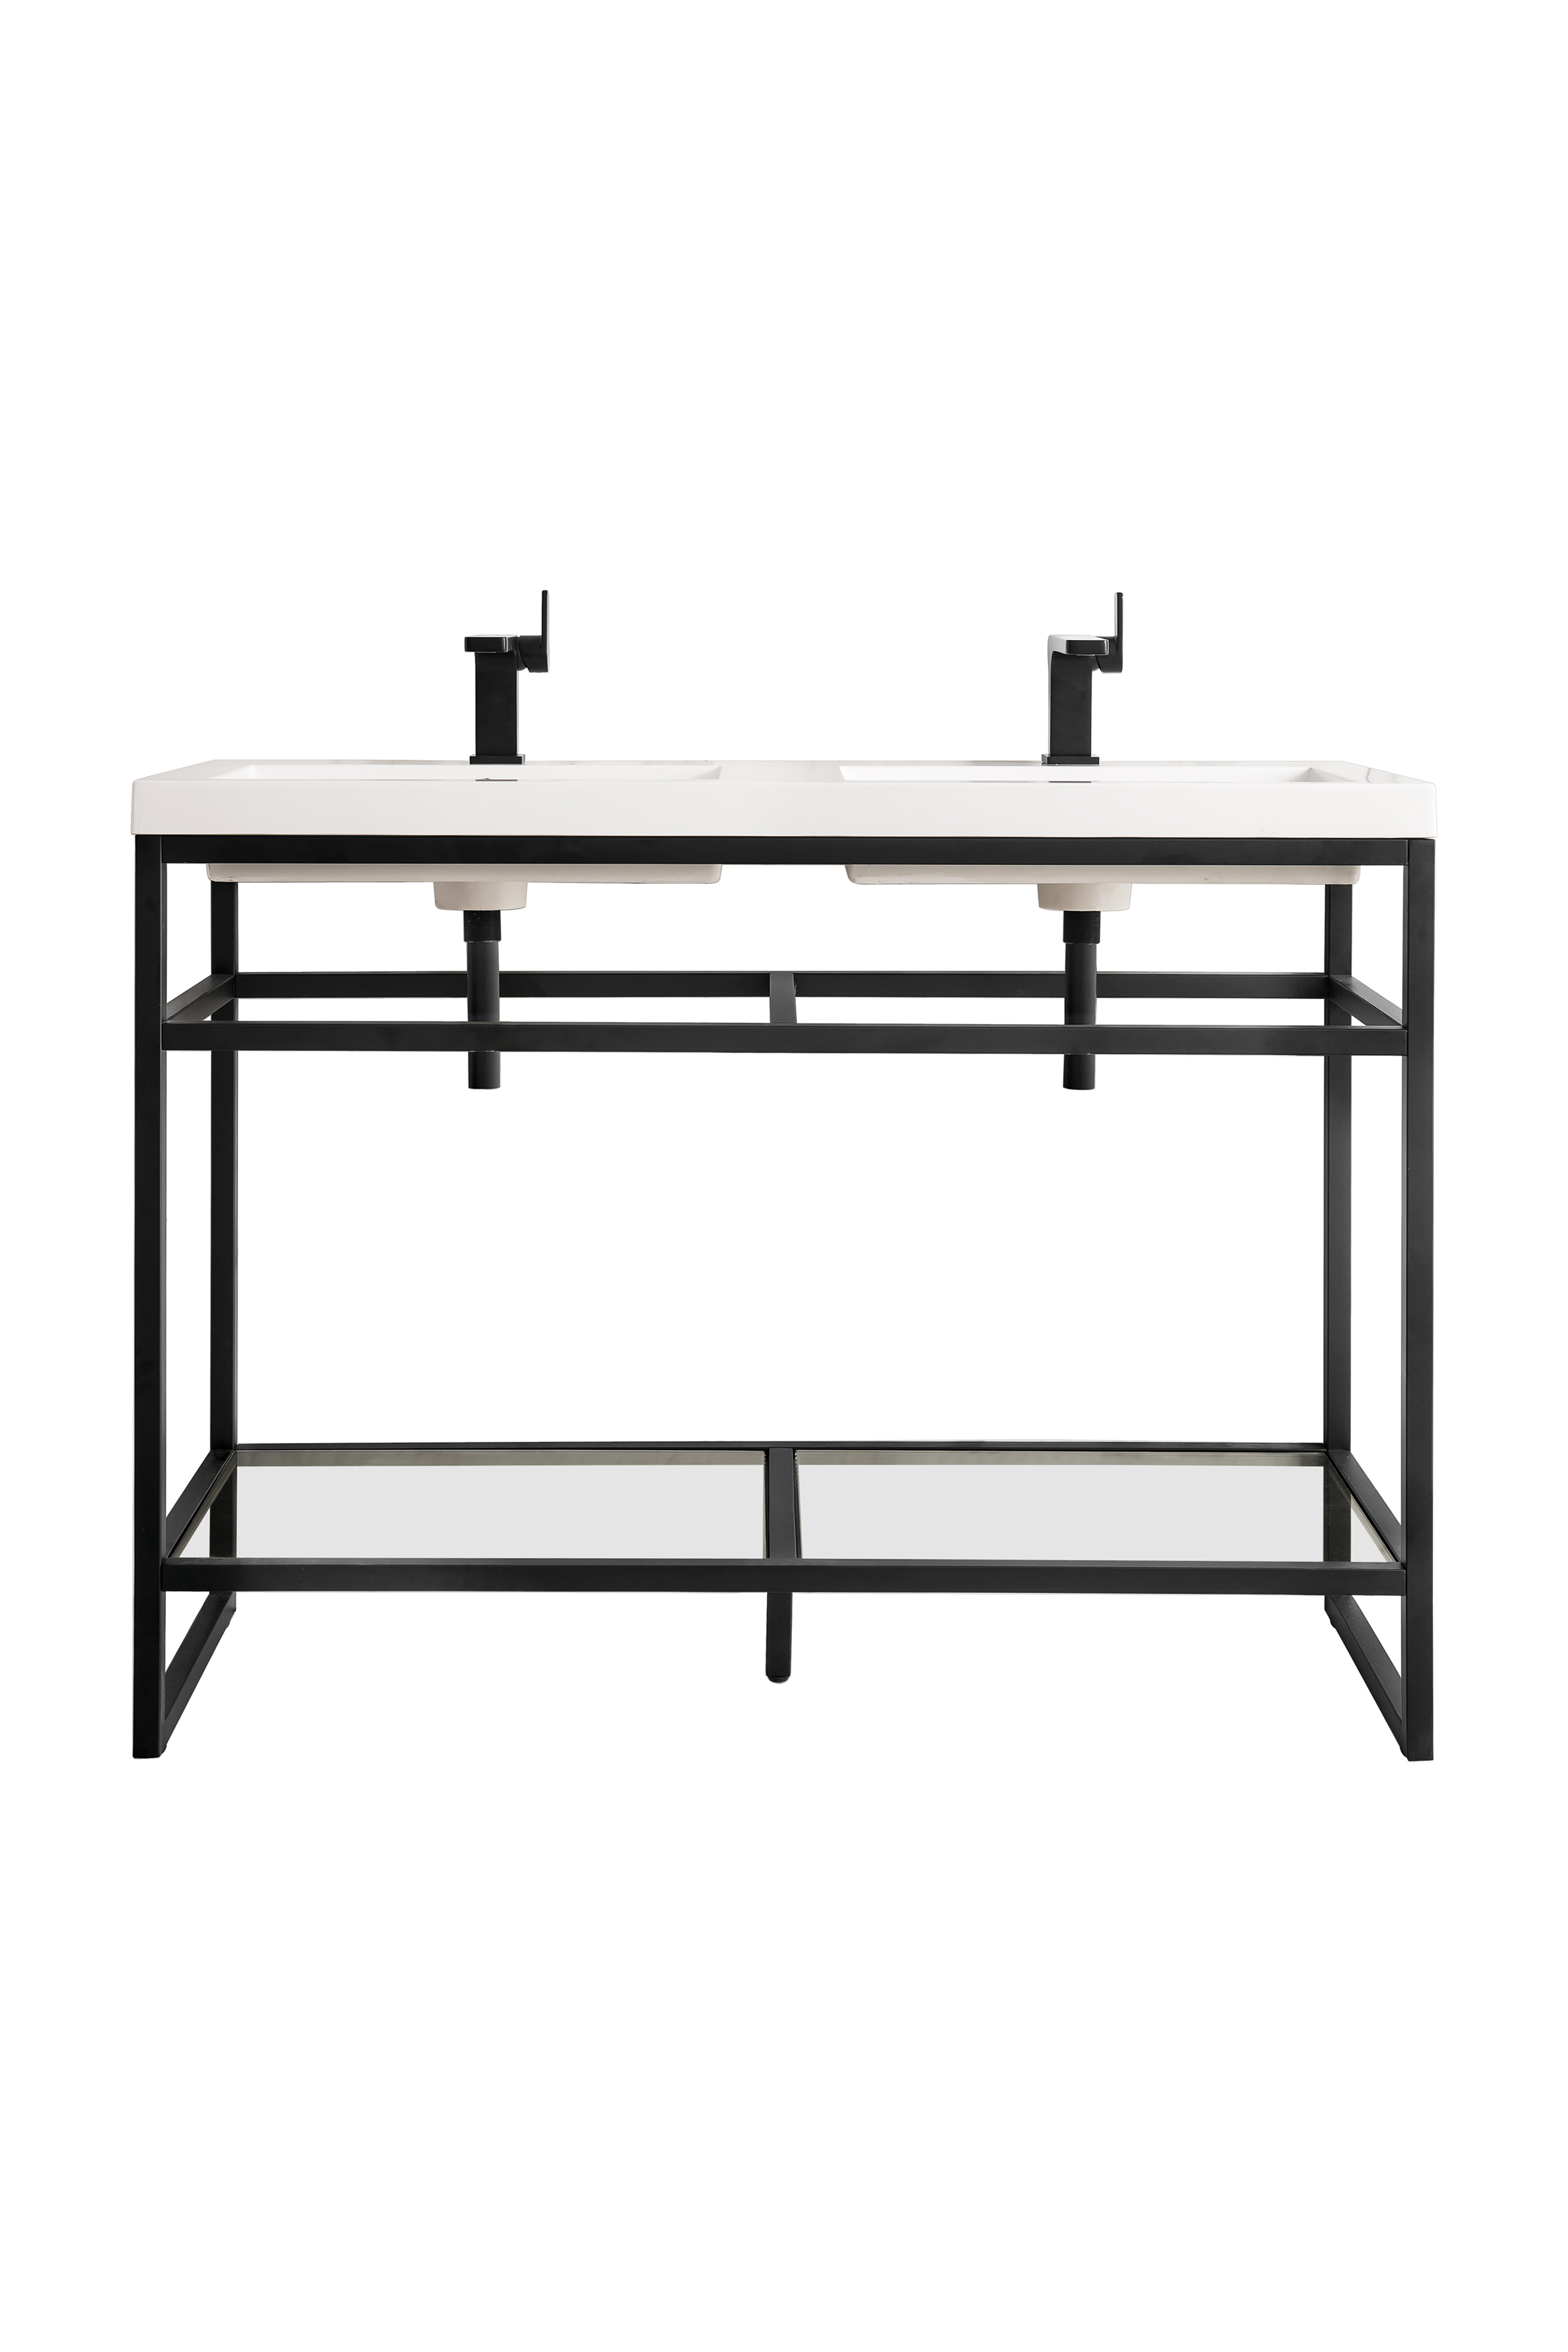 James Martin C105V47MBKWG Boston 47" Stainless Steel Sink Console (Double Basins), Matte Black w/ White Glossy Composite Countertop